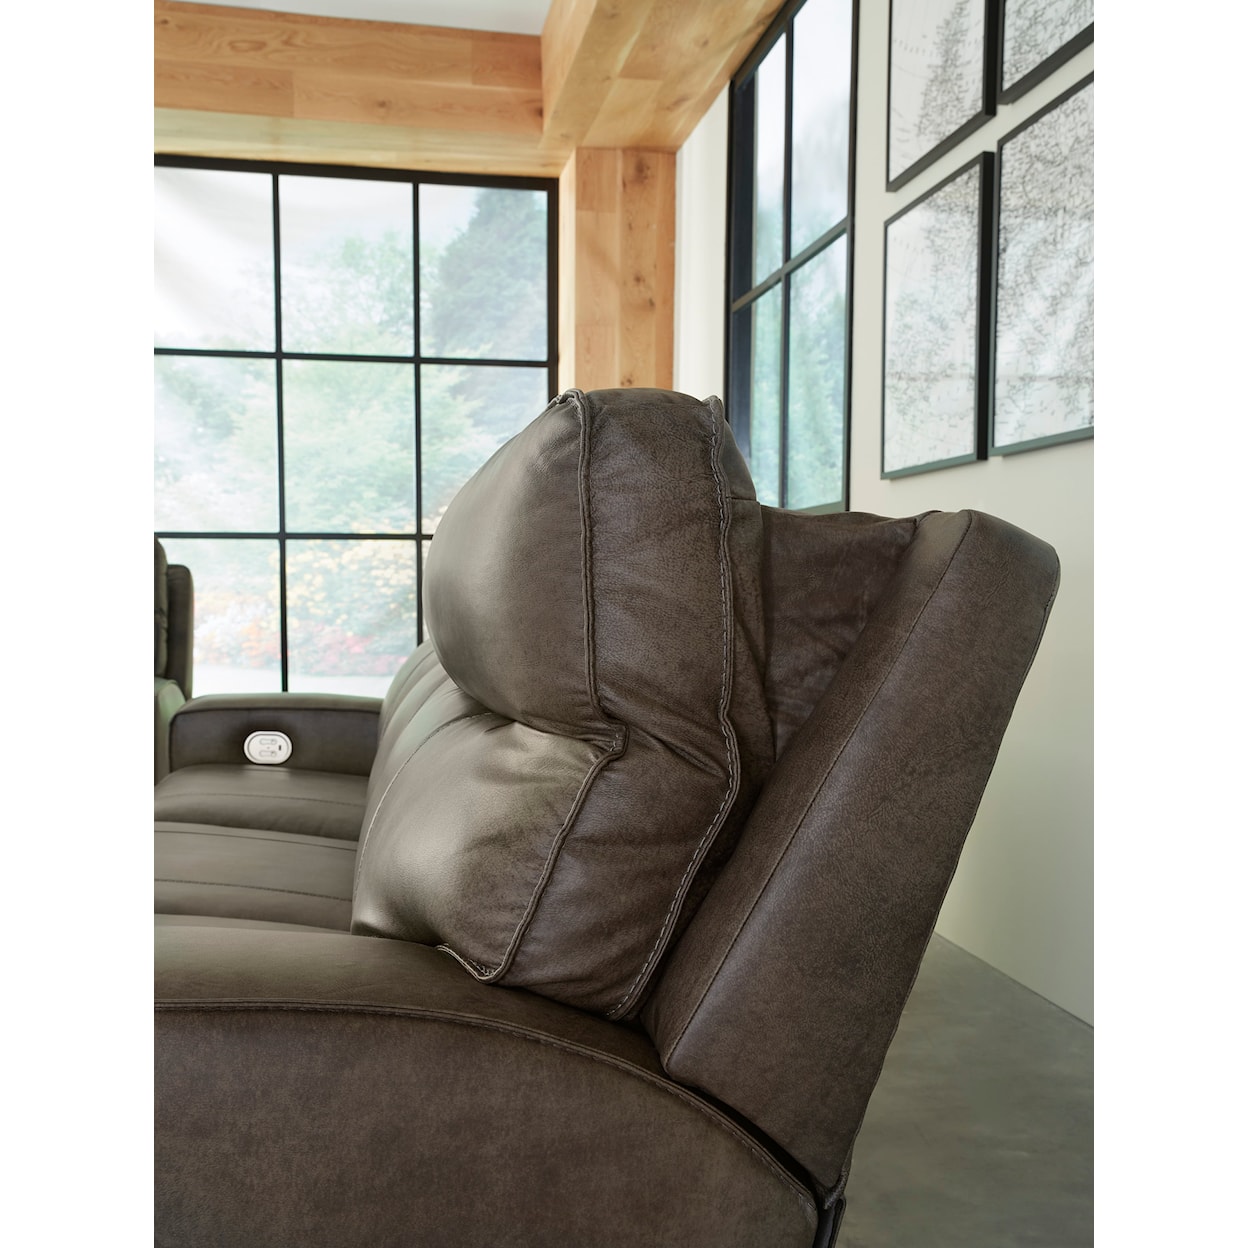 Signature Design by Ashley Game Plan Power Reclining Sofa